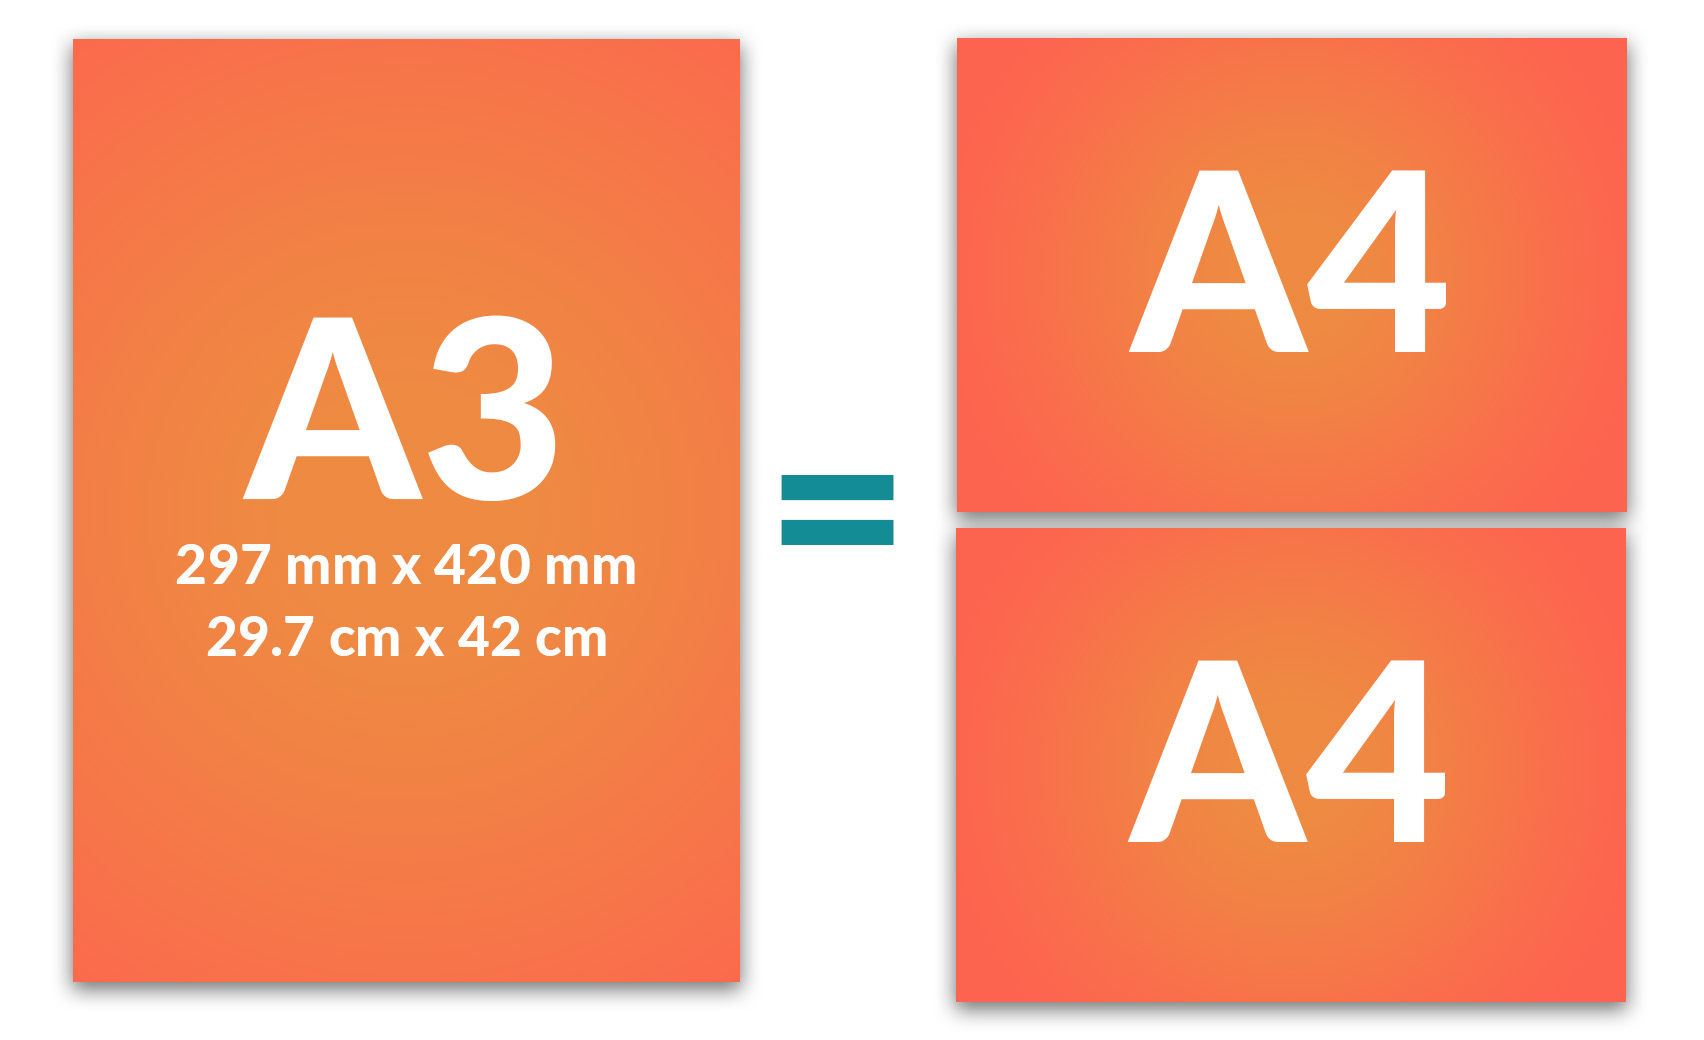 A3 Size in CM - A Paper Sizes